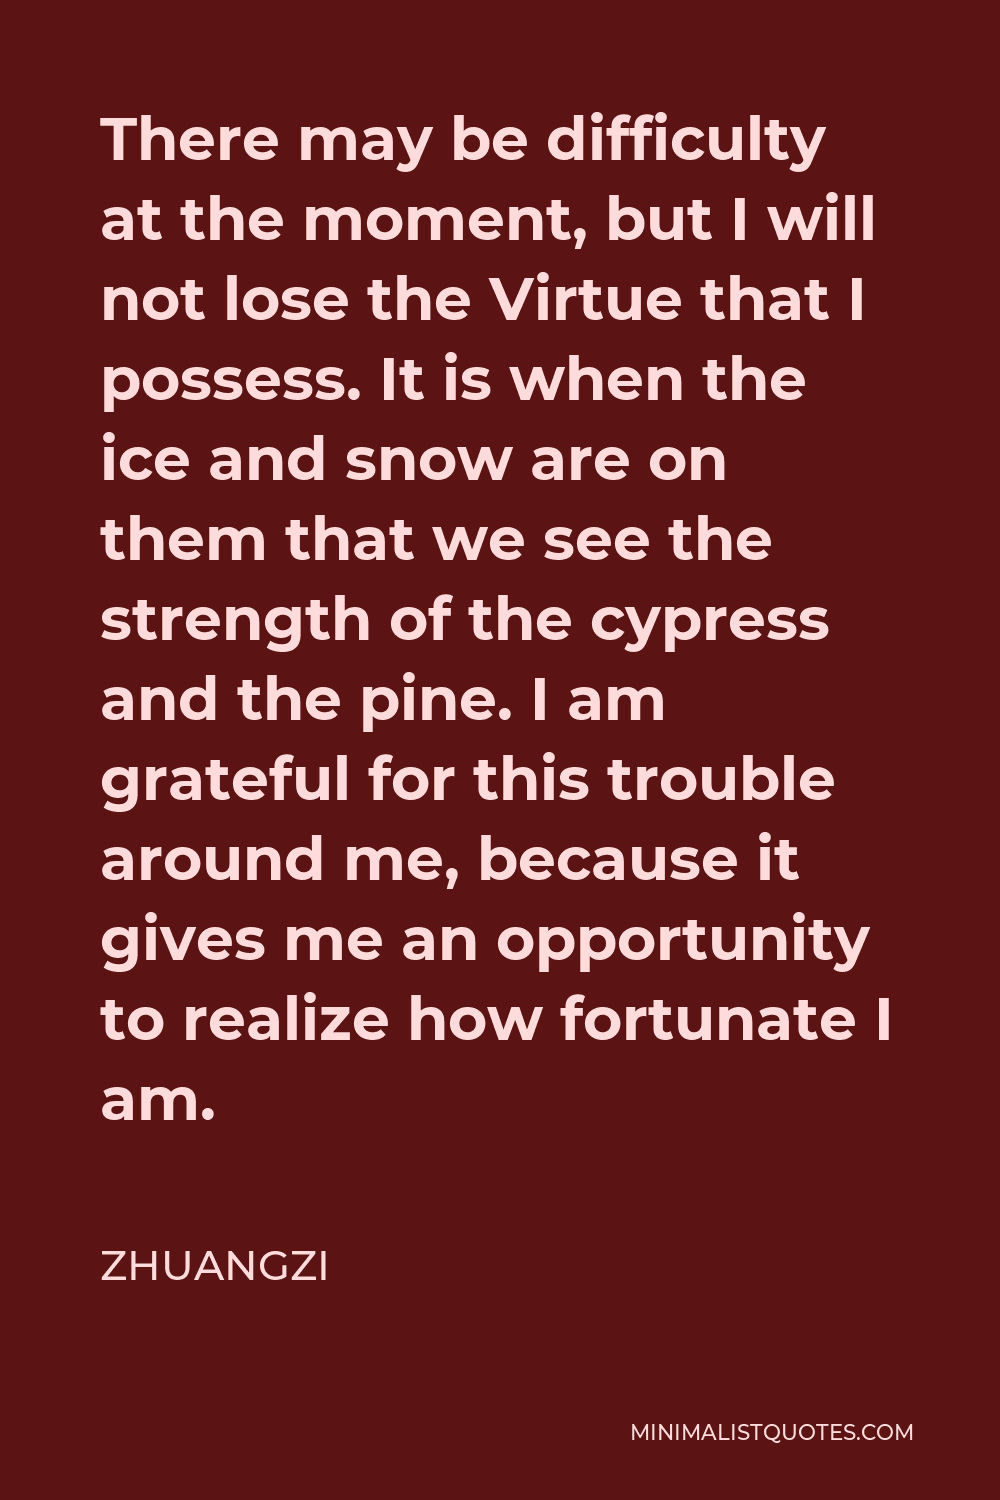 Zhuangzi Quote - There may be difficulty at the moment, but I will not lose the Virtue that I possess. It is when the ice and snow are on them that we see the strength of the cypress and the pine. I am grateful for this trouble around me, because it gives me an opportunity to realize how fortunate I am.